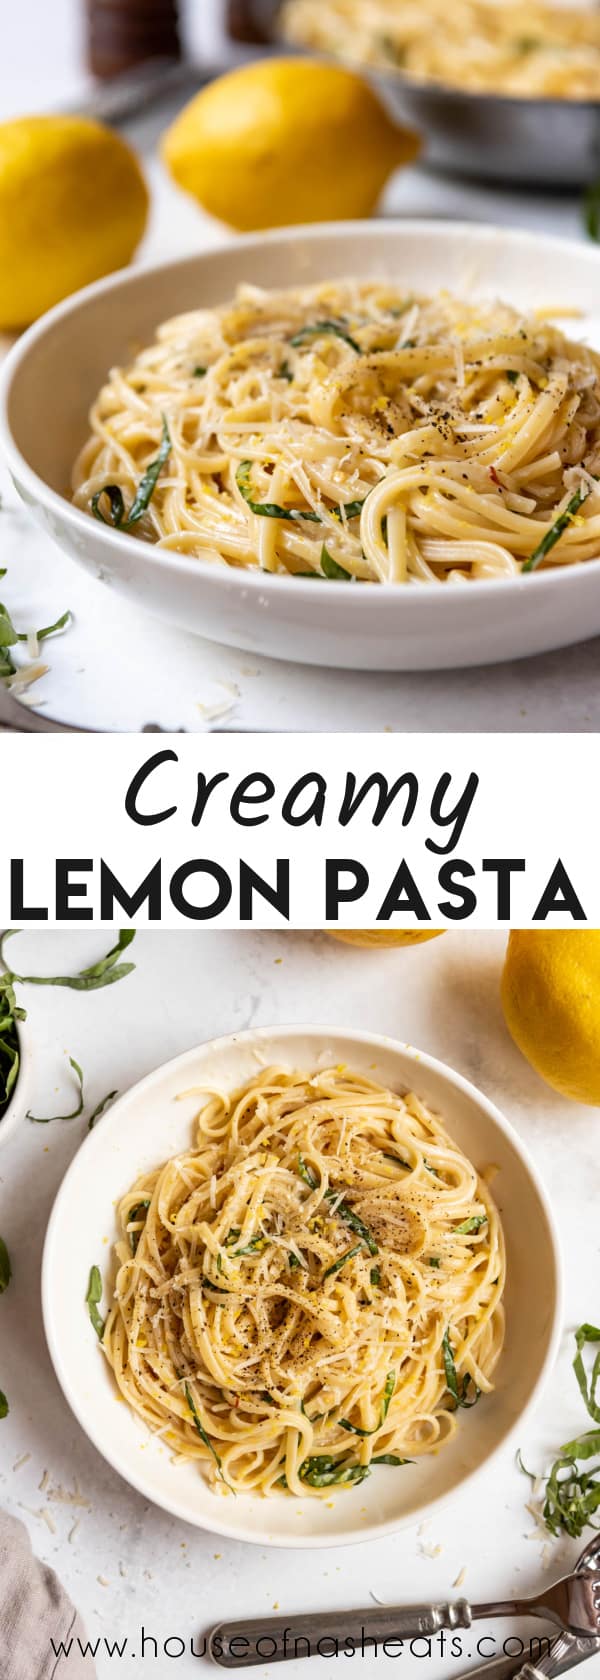 A collage of images of a bowl of lemon pasta with text overlay.